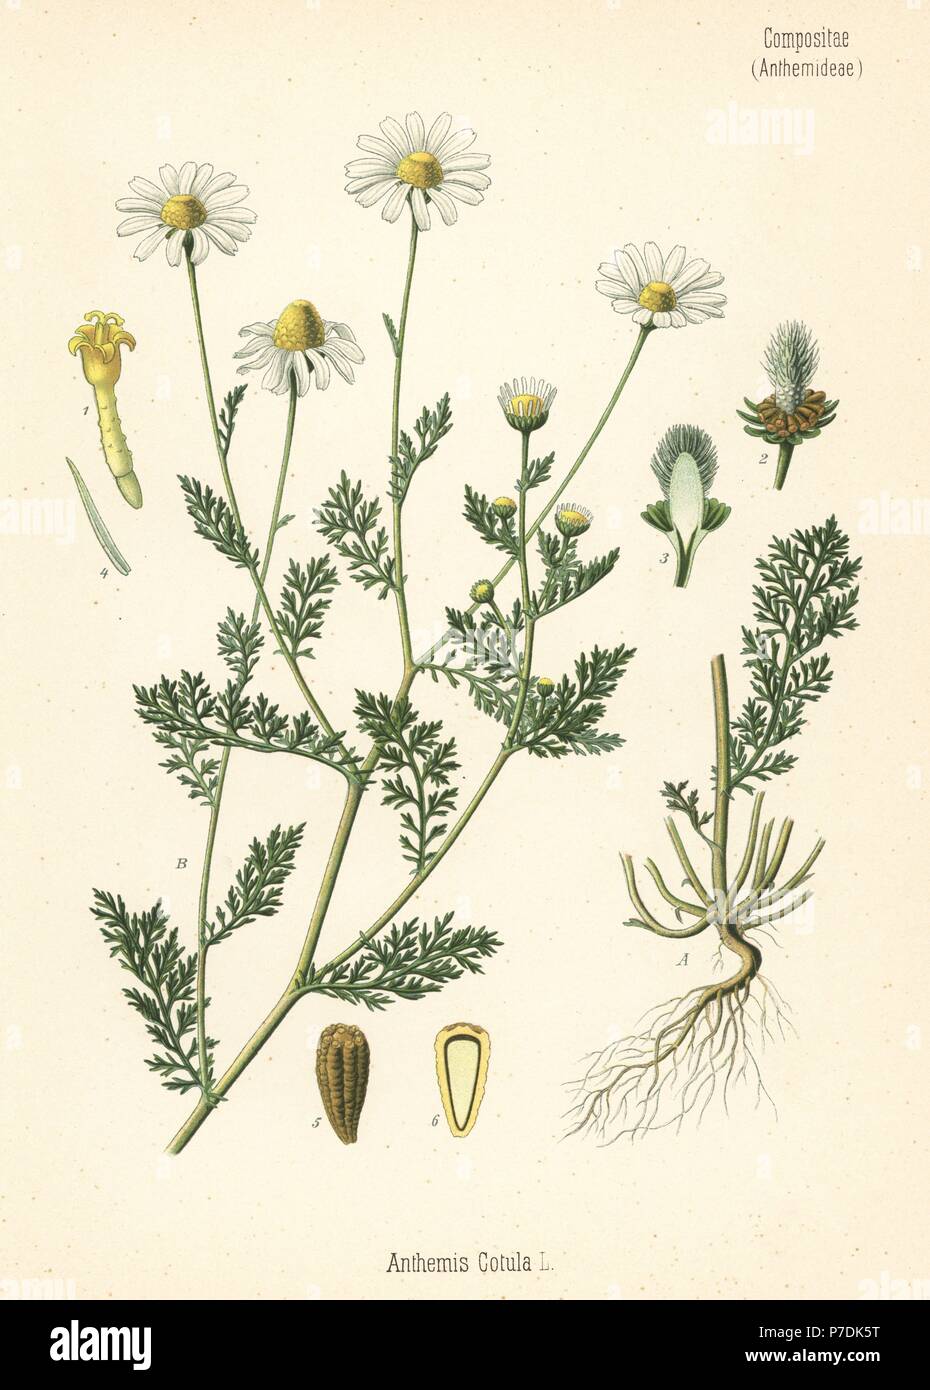 Stinking chamomile, Anthemis cotula. Chromolithograph after a botanical illustration from Hermann Adolph Koehler's Medicinal Plants, edited by Gustav Pabst, Koehler, Germany, 1887. Stock Photo